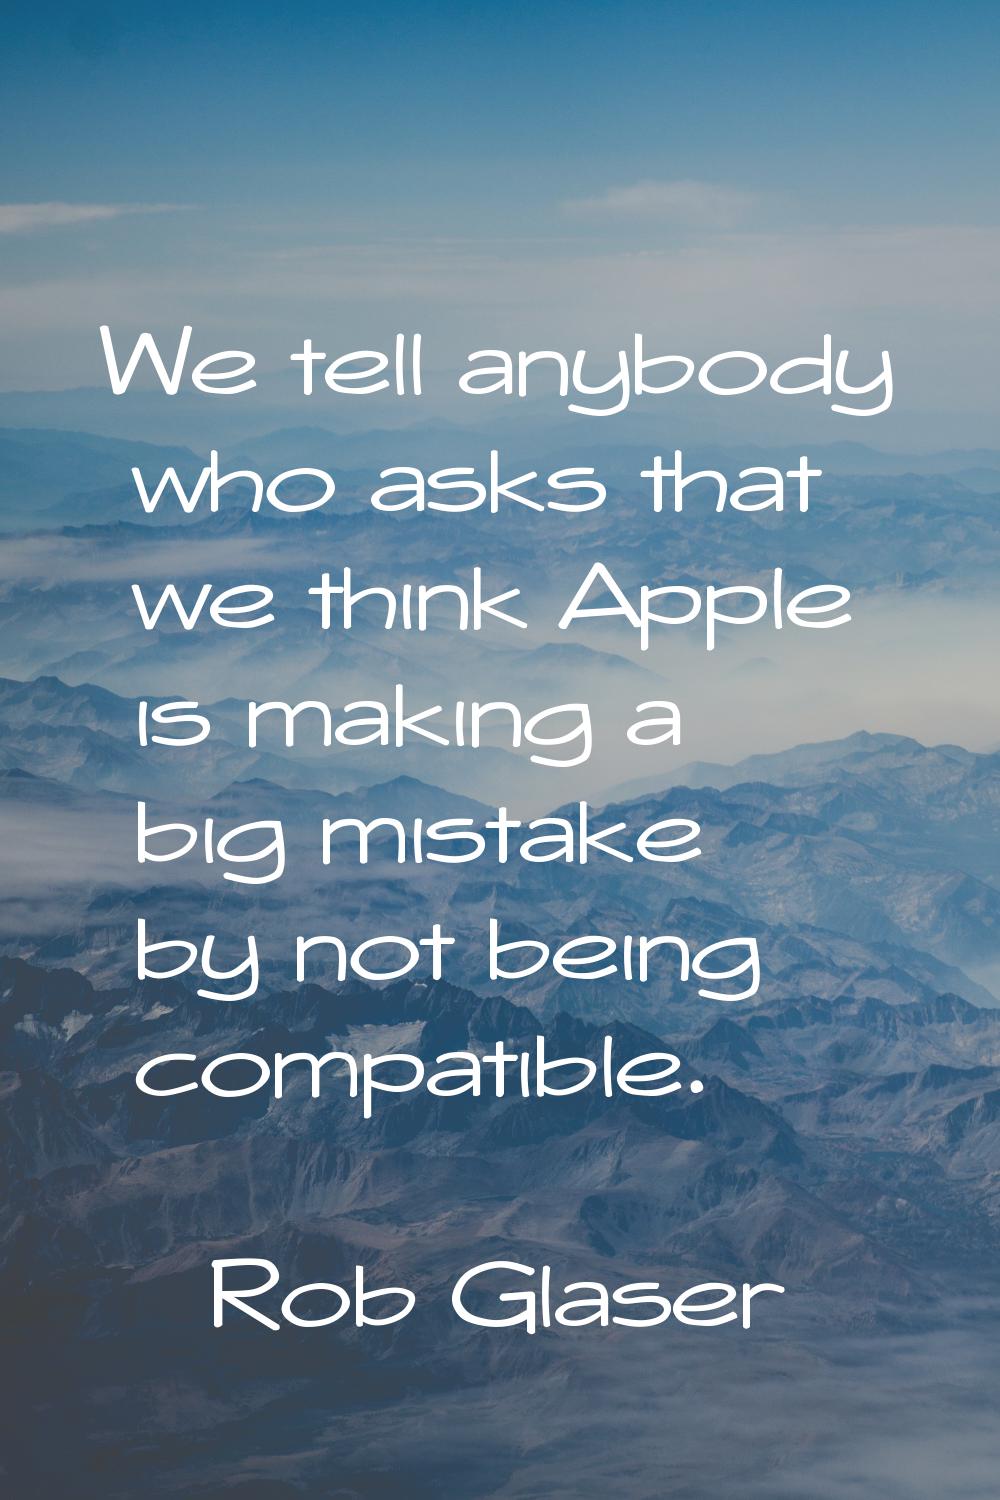 We tell anybody who asks that we think Apple is making a big mistake by not being compatible.